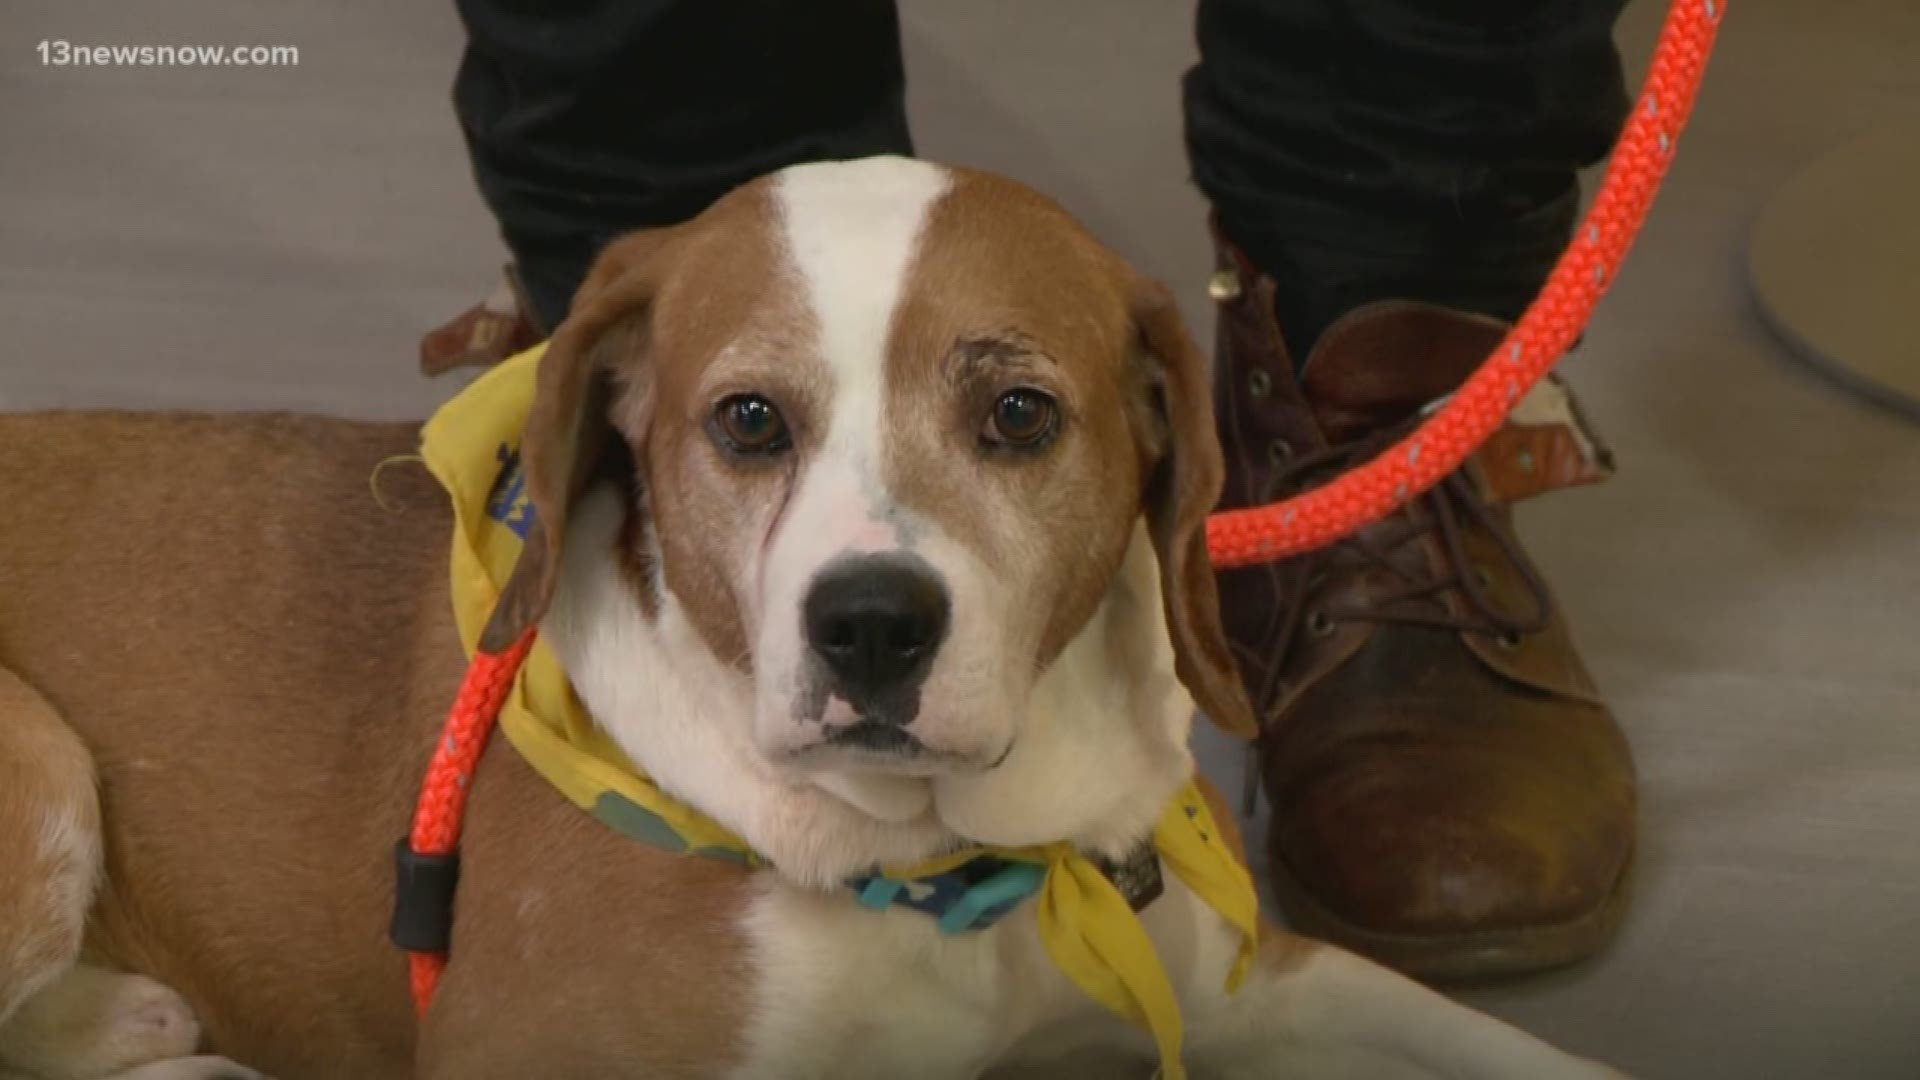 Meet Todd! Three-year-old Todd comes from the Virginia Beach SPCA and is looking for his forever home.